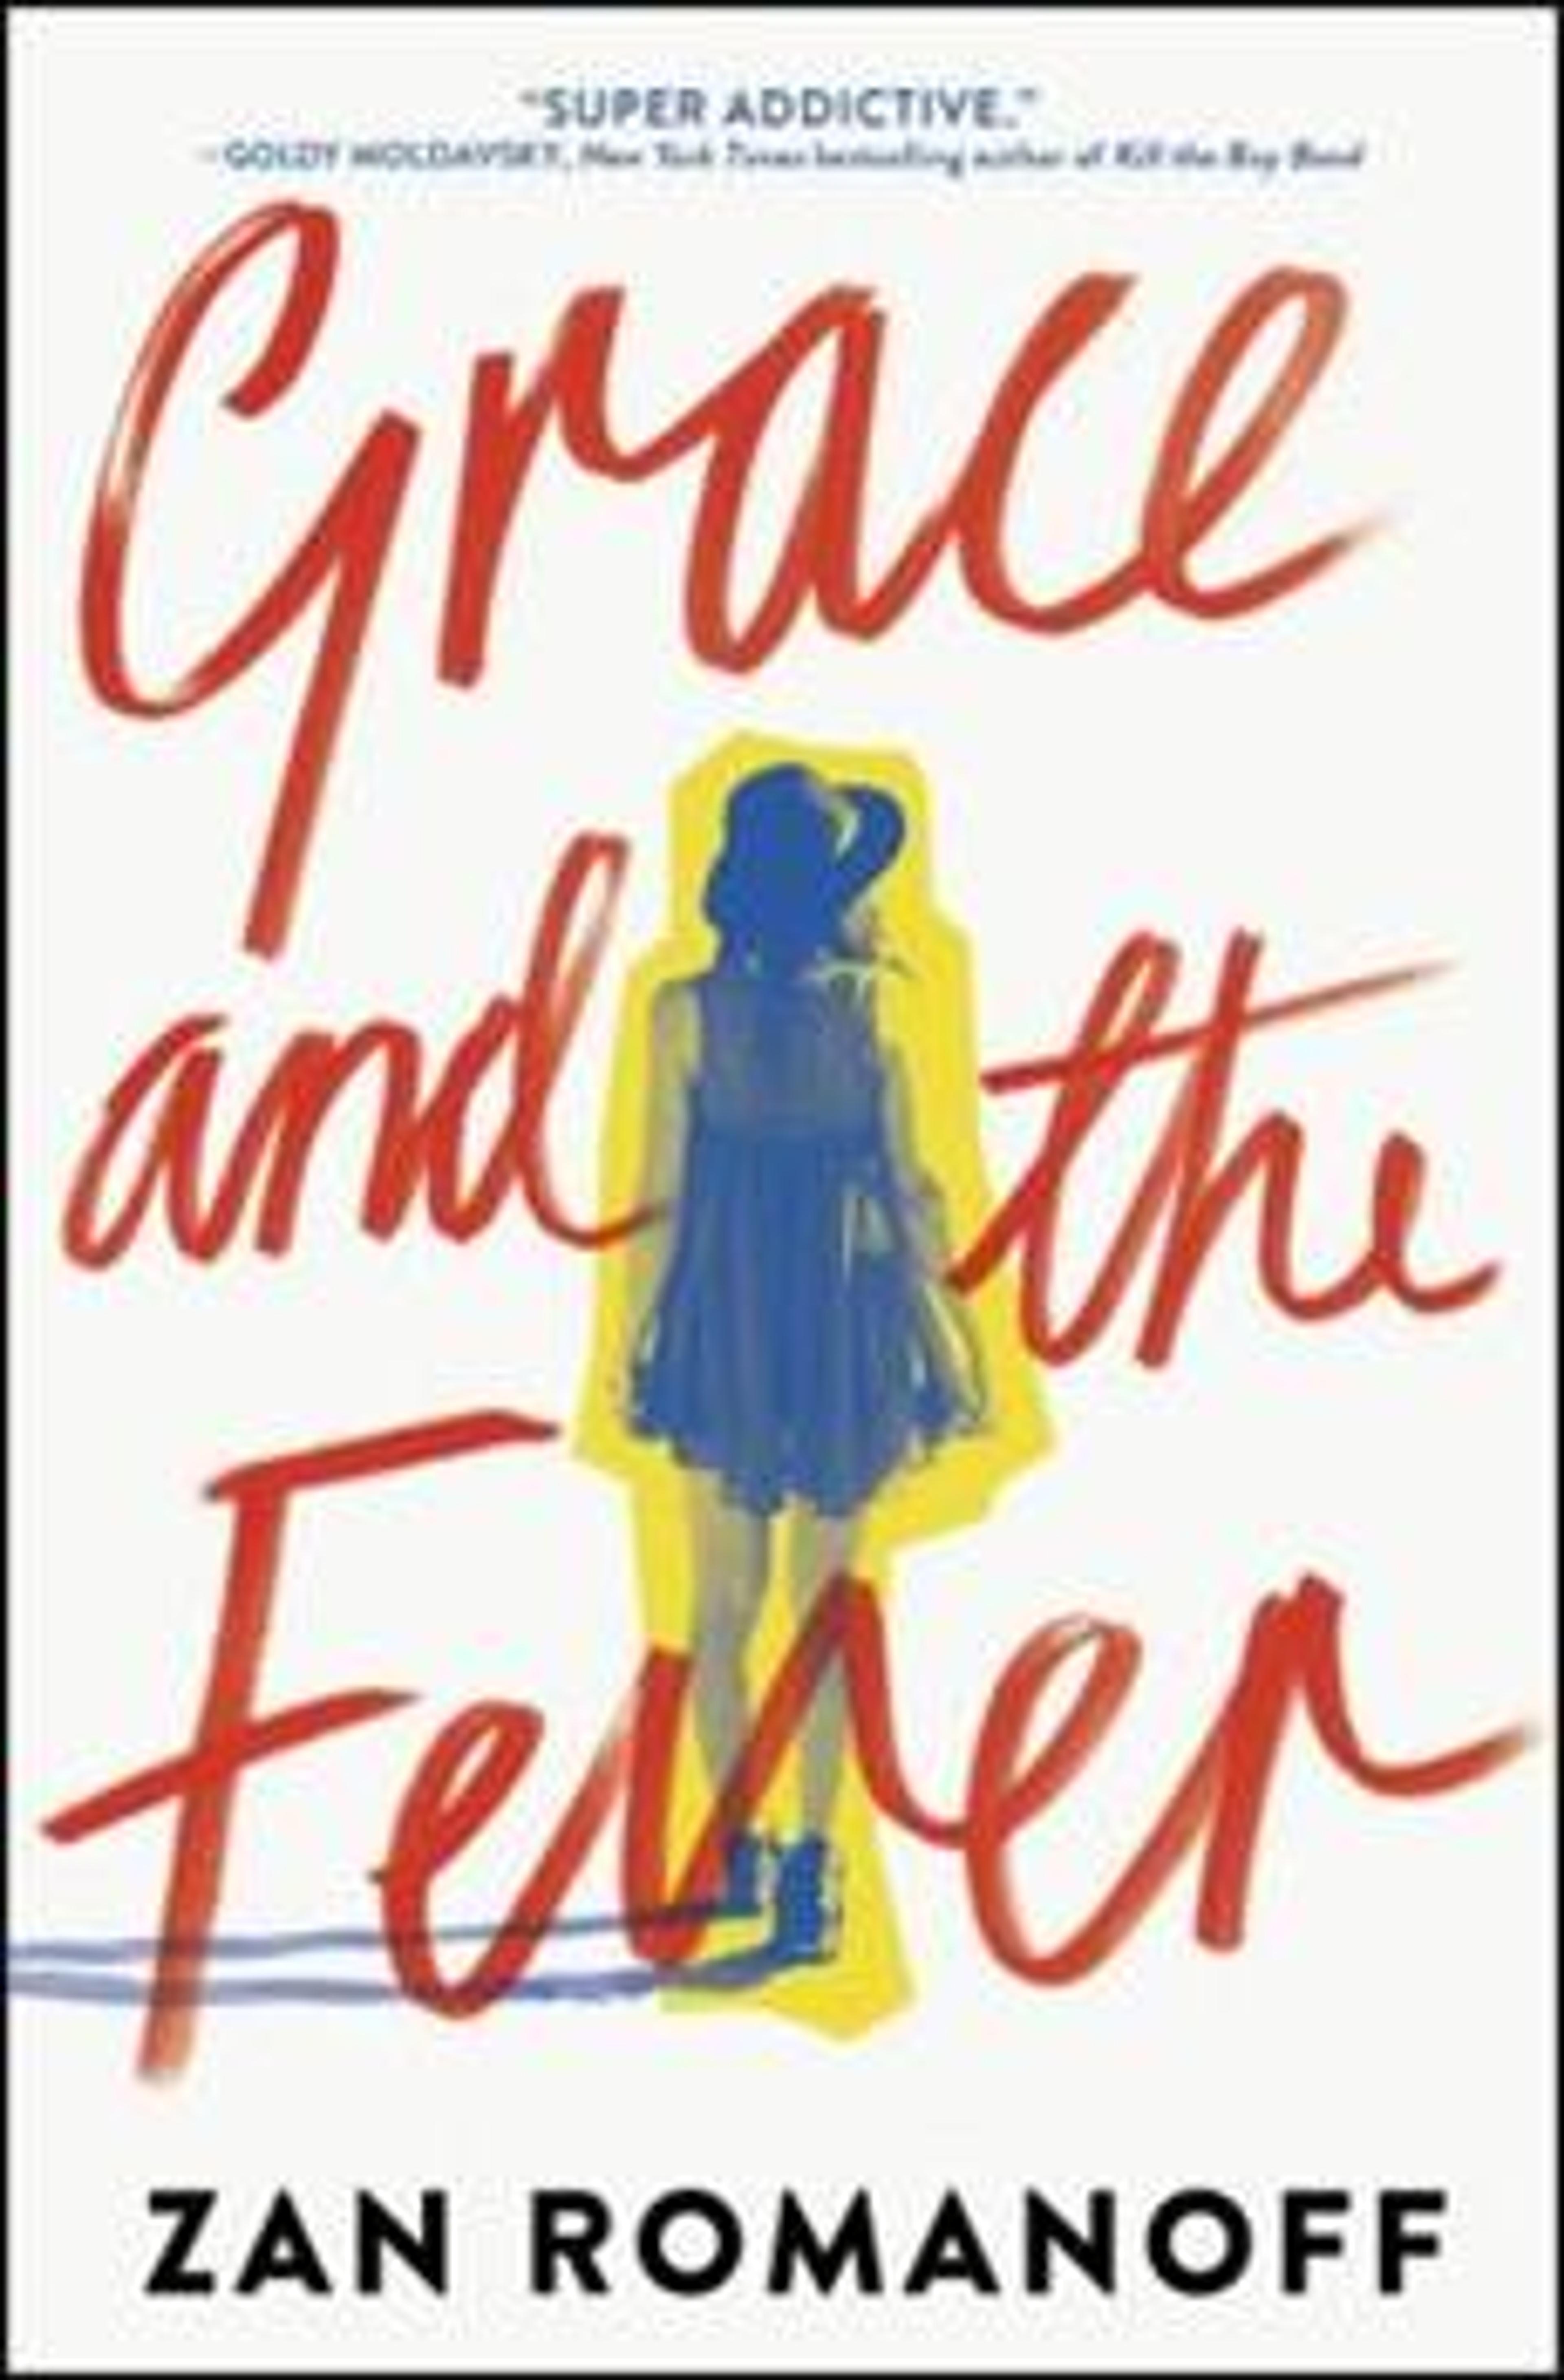 Grace and the Fever book by Zan Romanoff